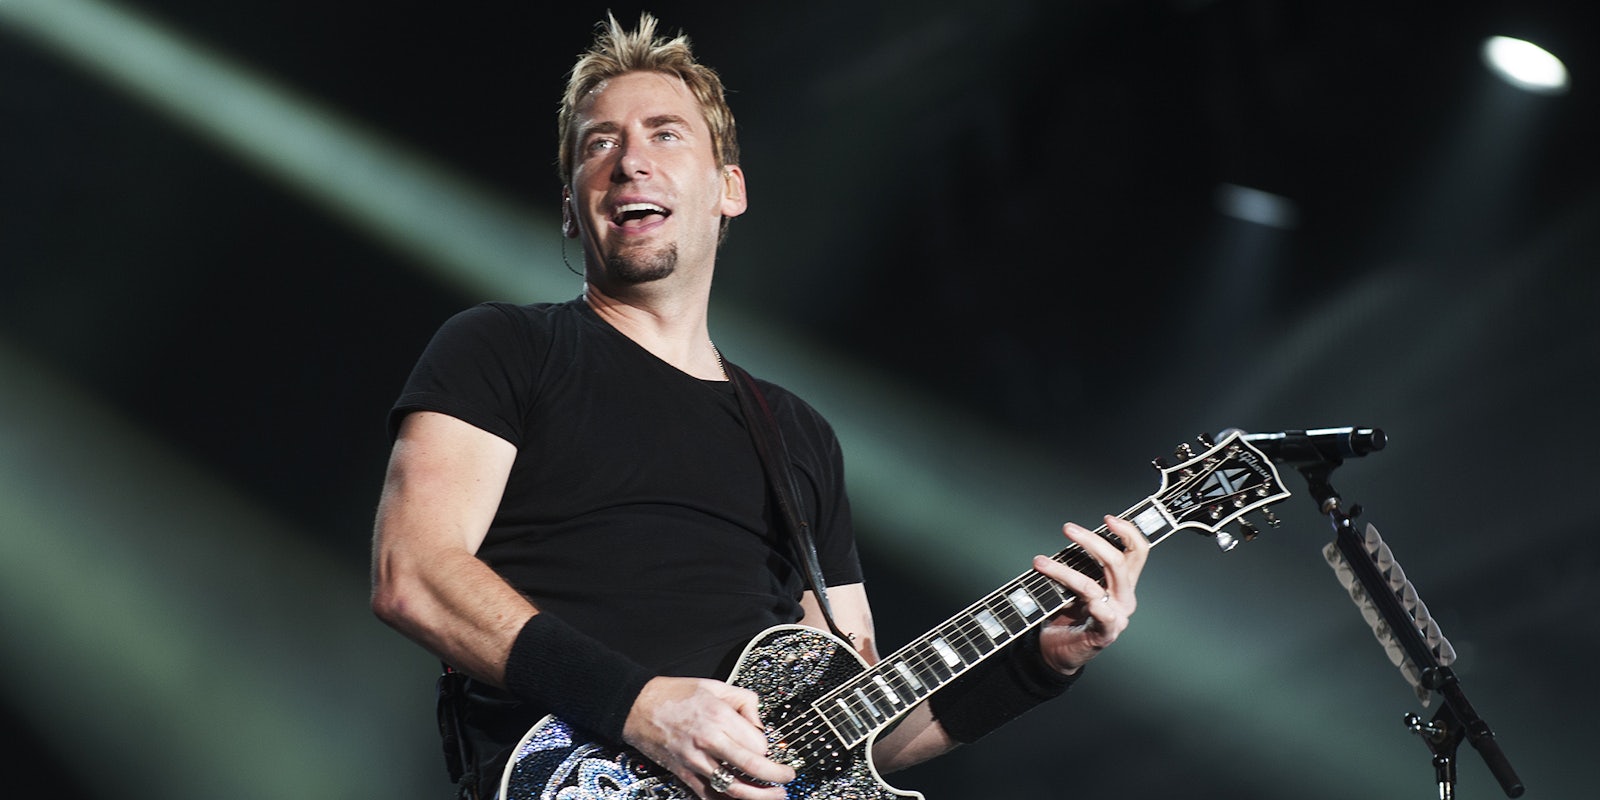 had Kroeger, lead vocalist of the Canadian band Nickelback,